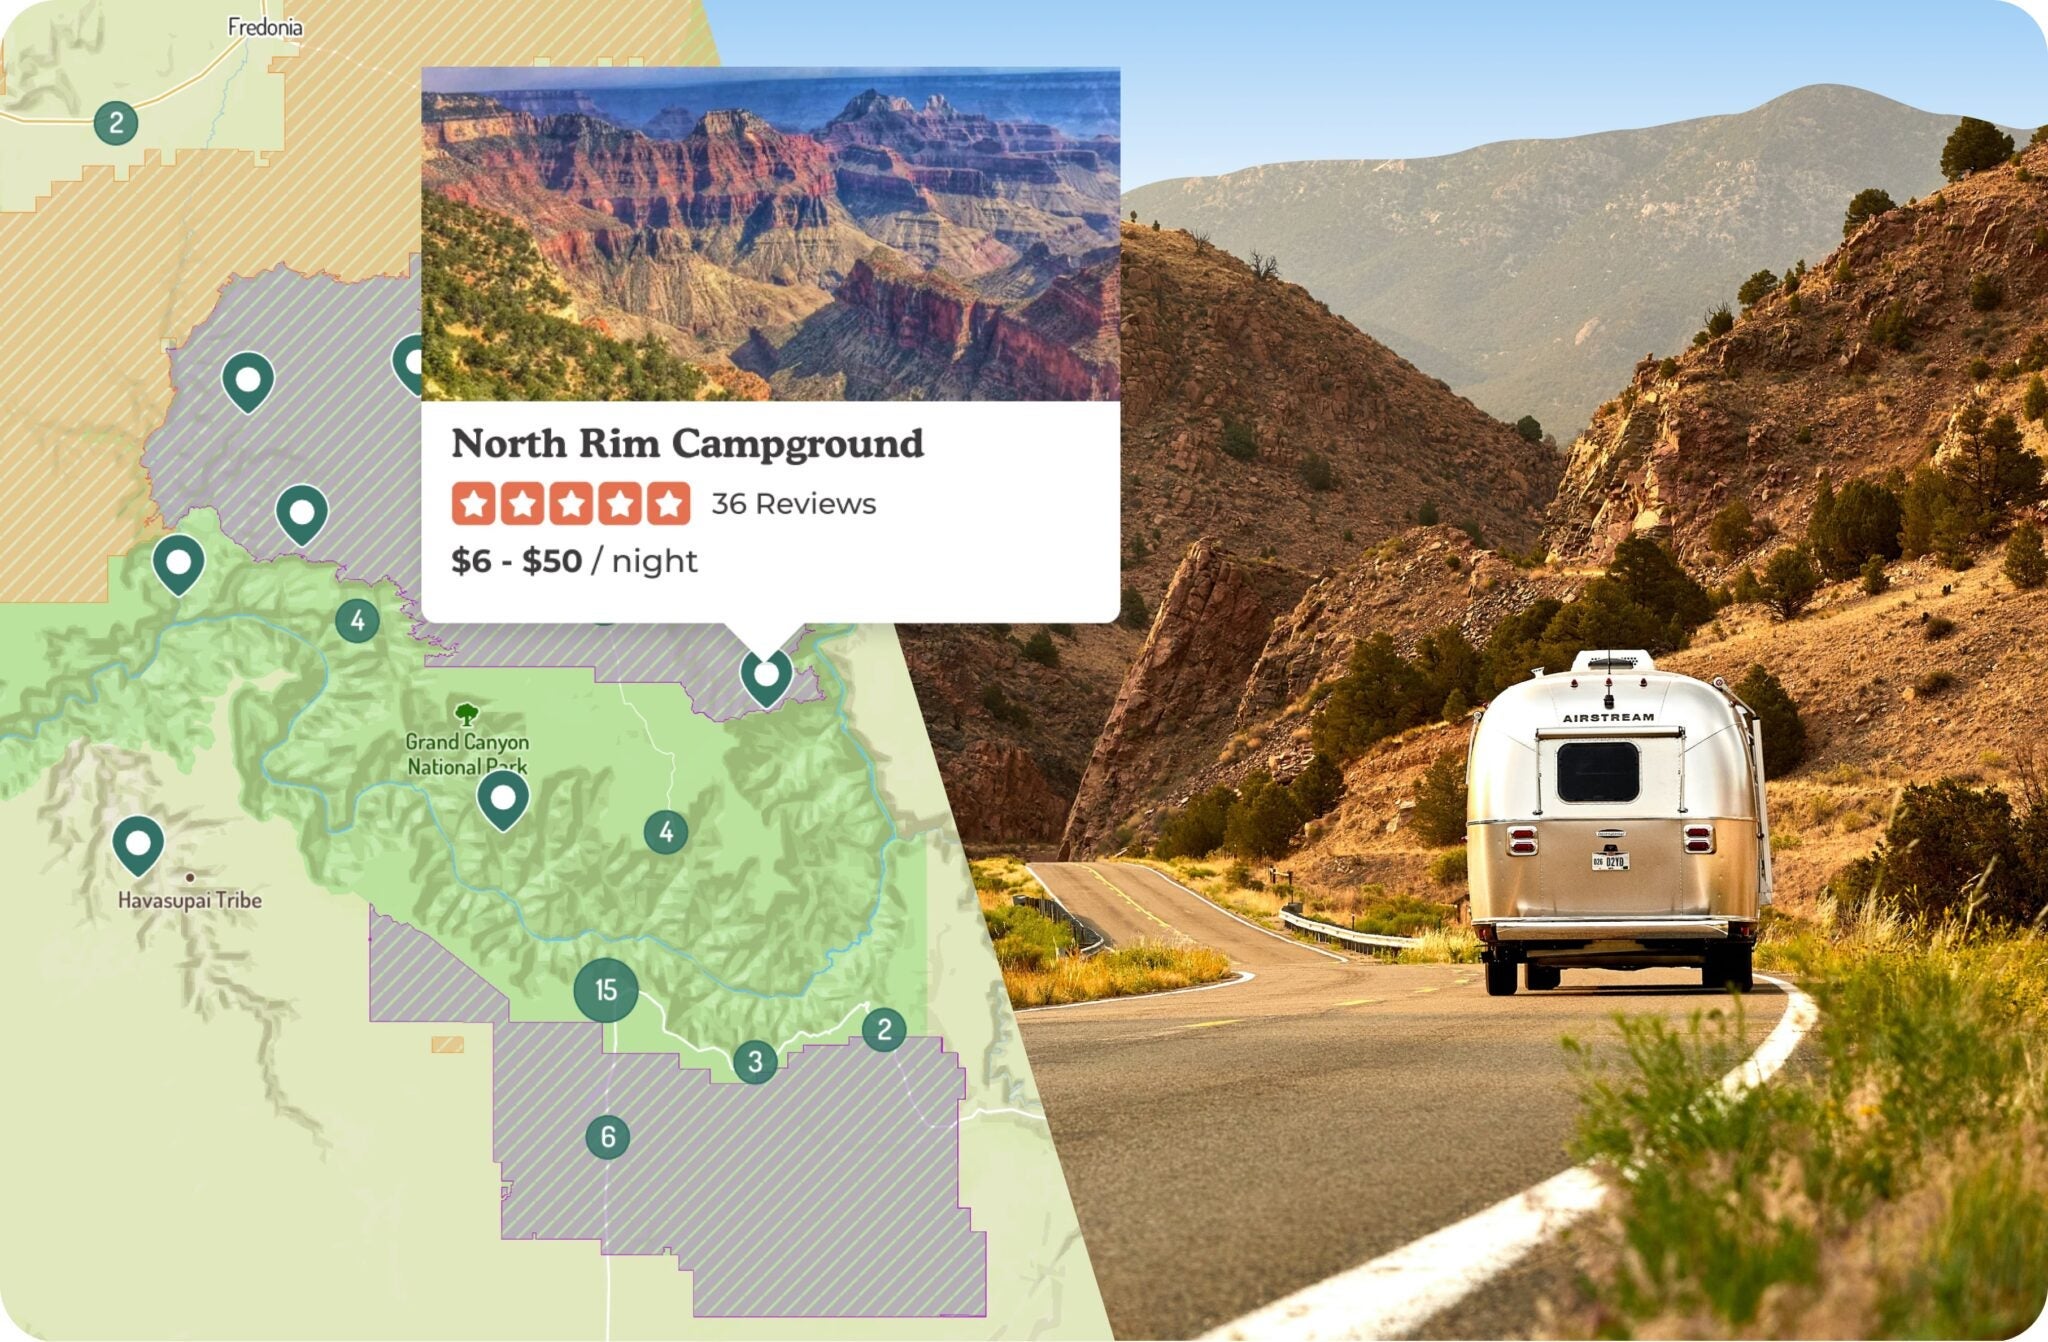 This comprehensive guide serves as a valuable resource for campers, providing information on the exact dates when reservations open at every state and national park in the United States.